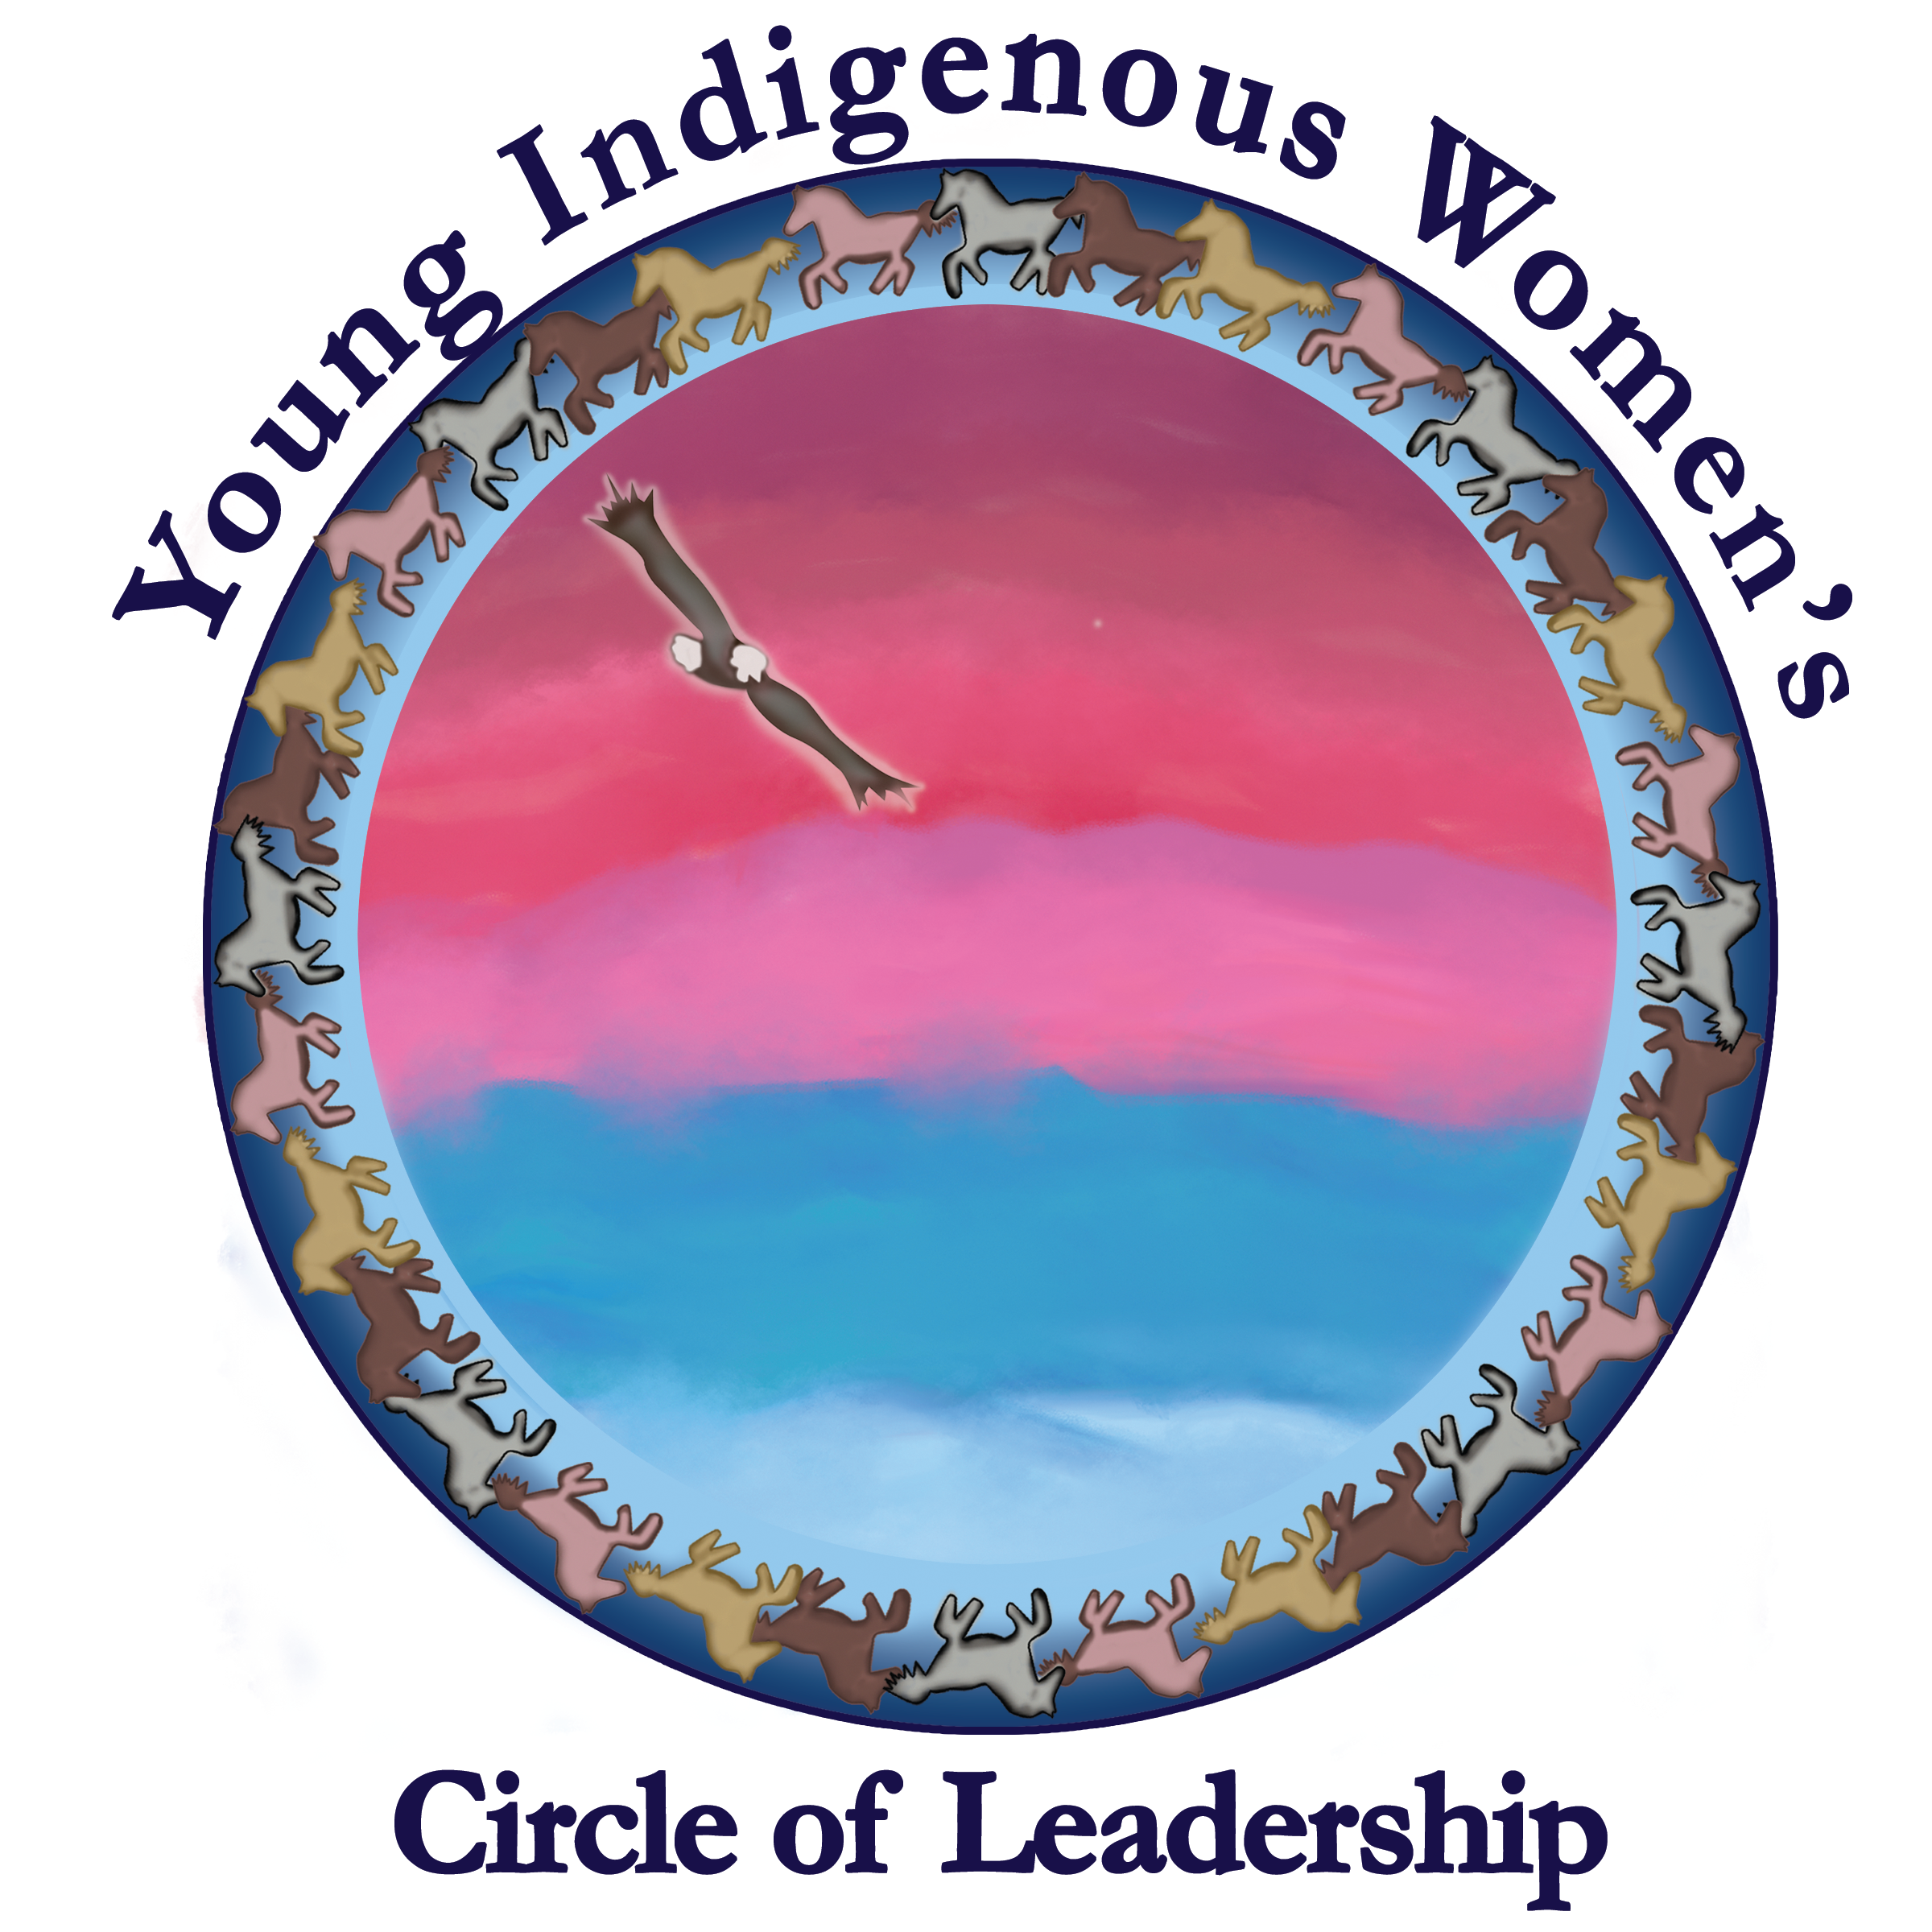 Text that says "Young Indigenous Women's Circle of Leadership" around a circle that has horses surrounding a sunset sky. An eagle flies against the background. 